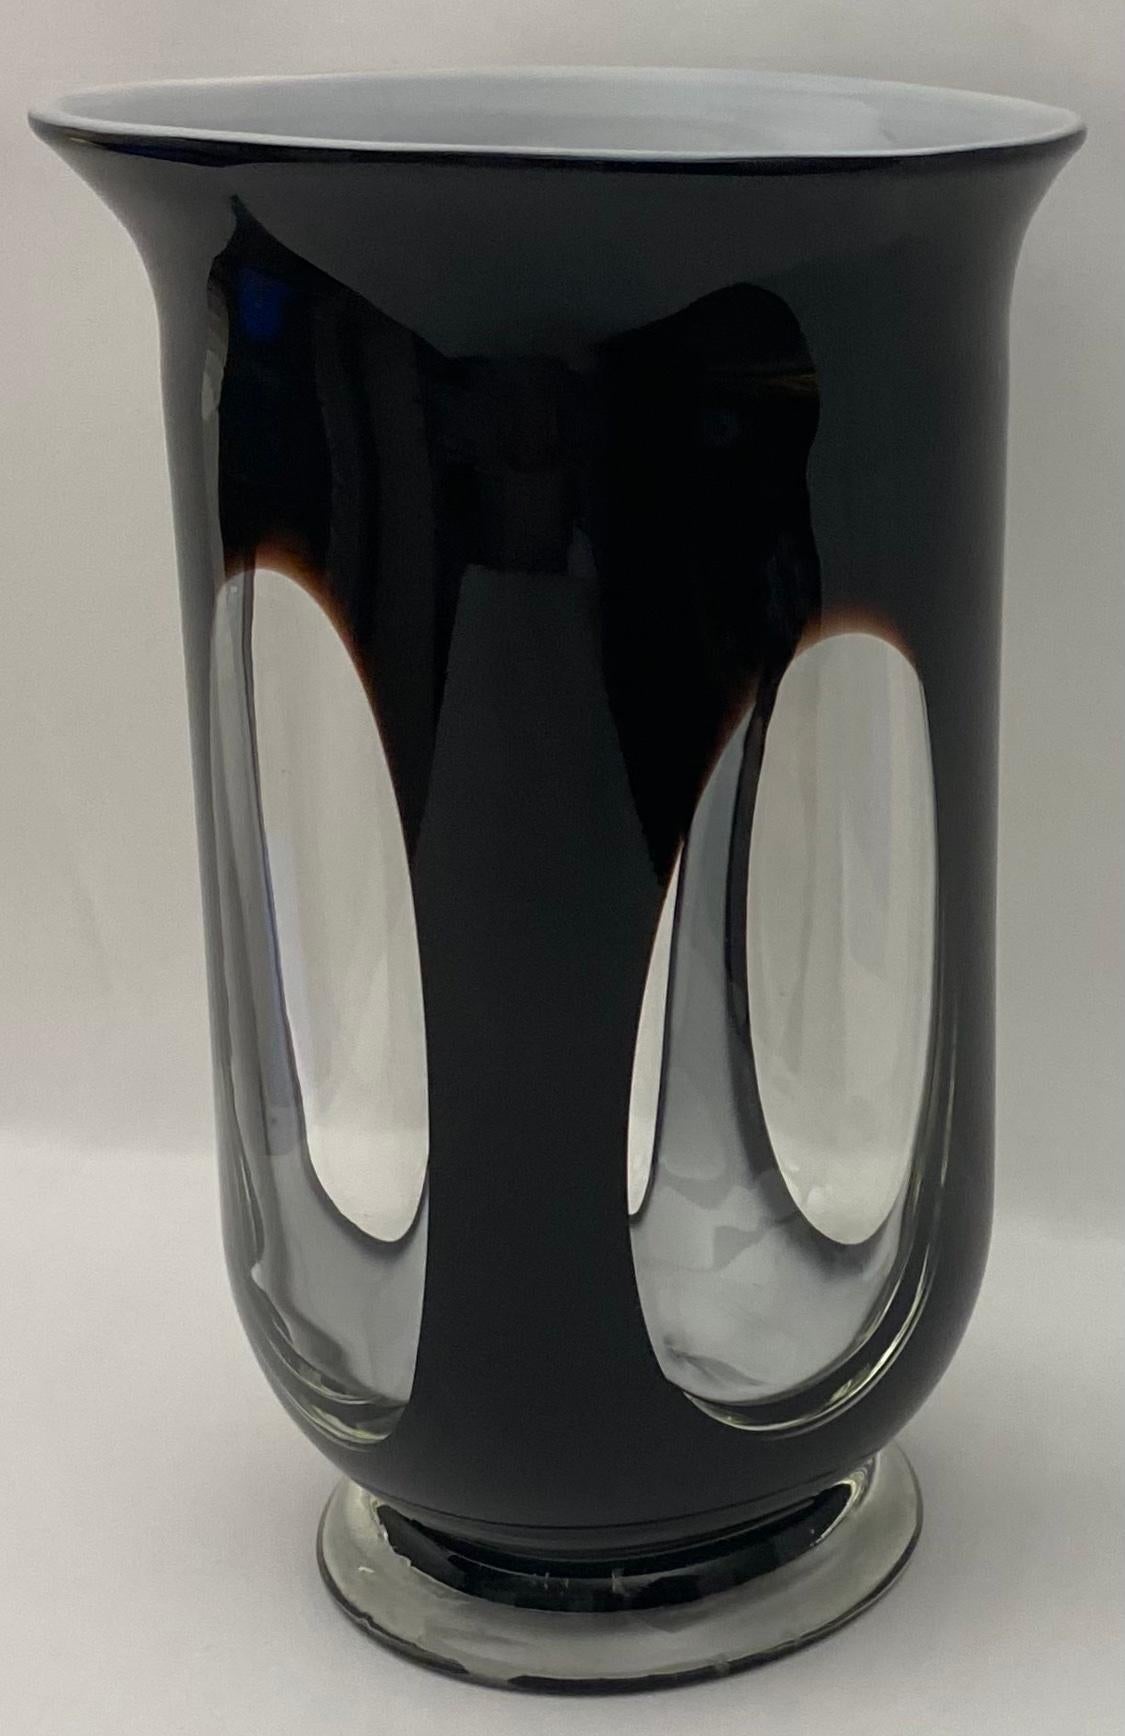 A good quality Murano art glass vase great for showcasing your most favorite flowers. 

Measures: 7 1/4